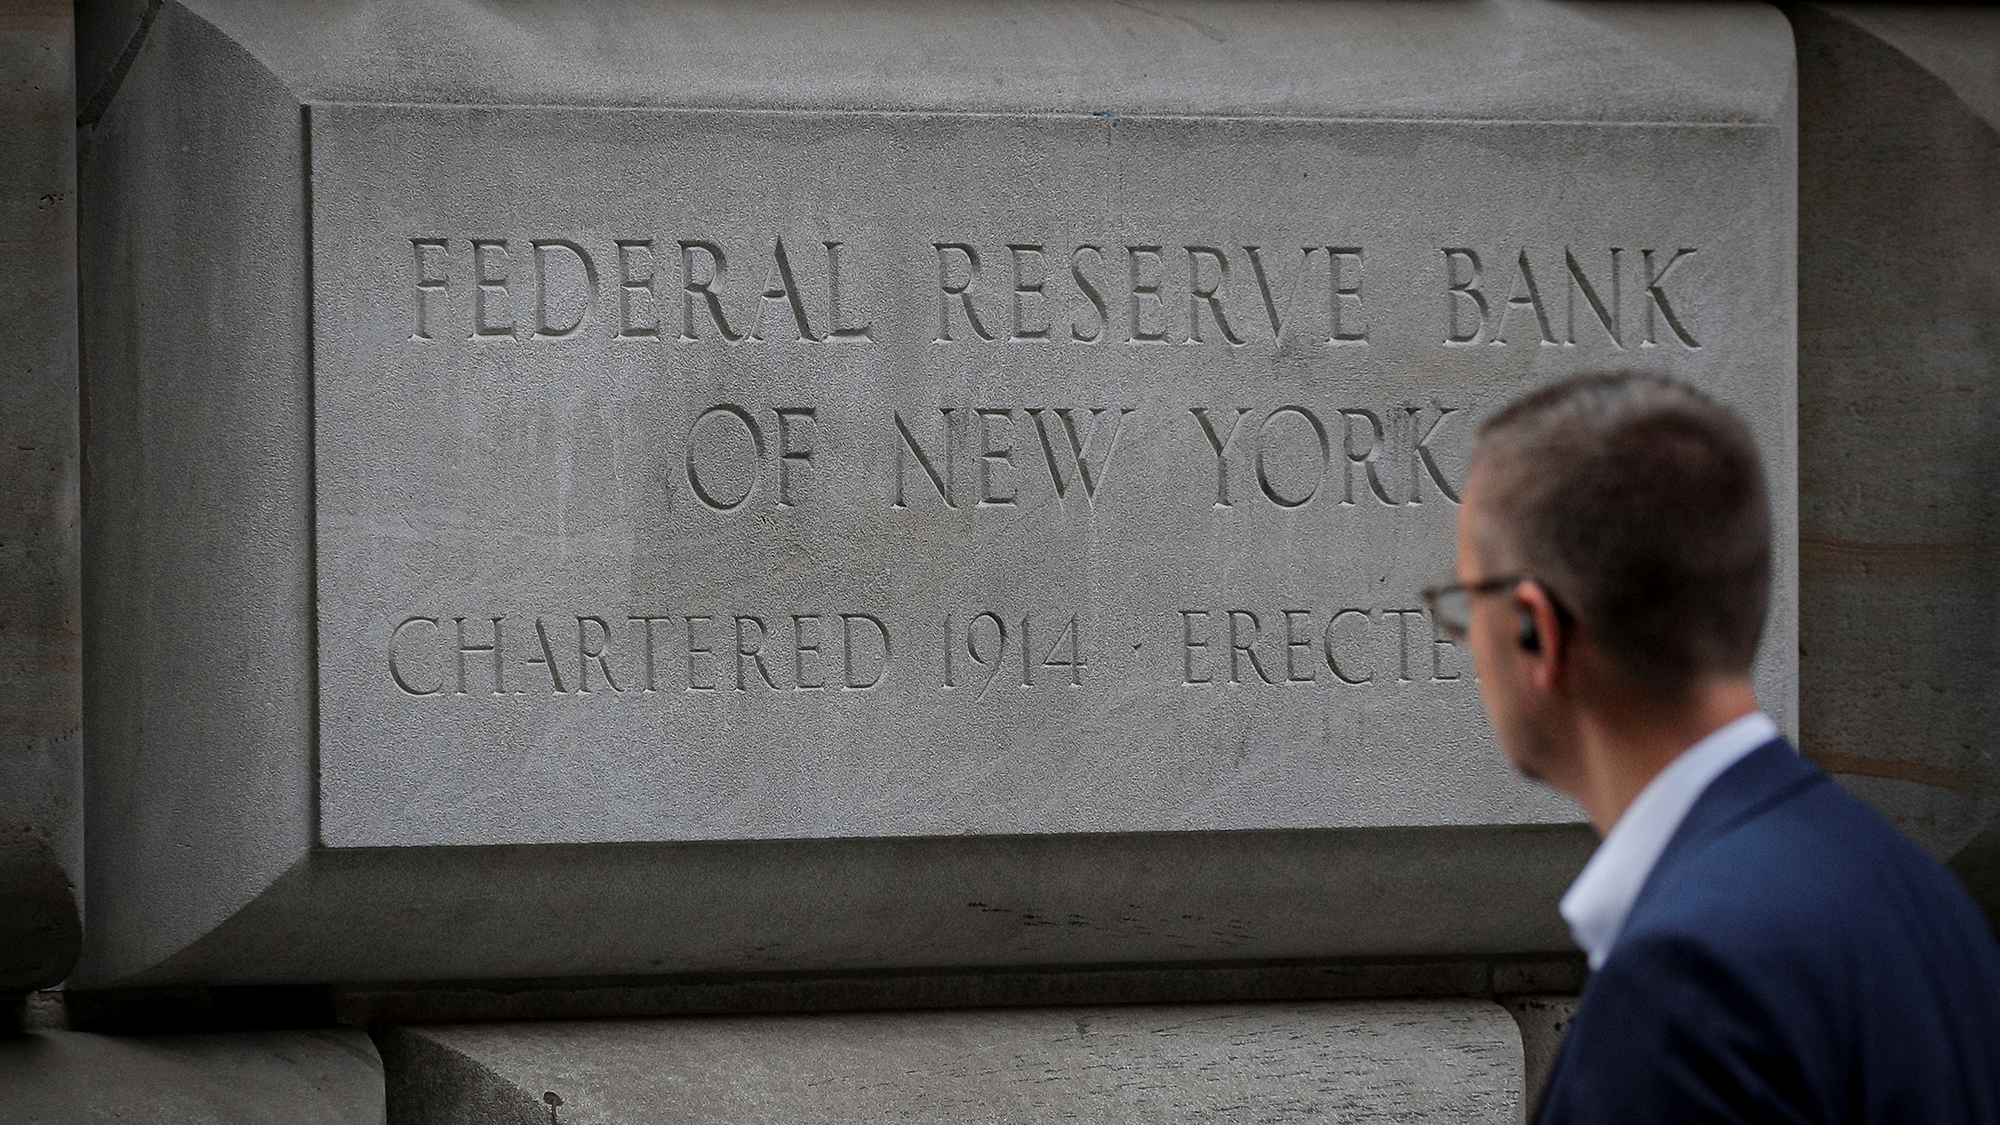 Daily Schedules - Federal Reserve Bank of New York